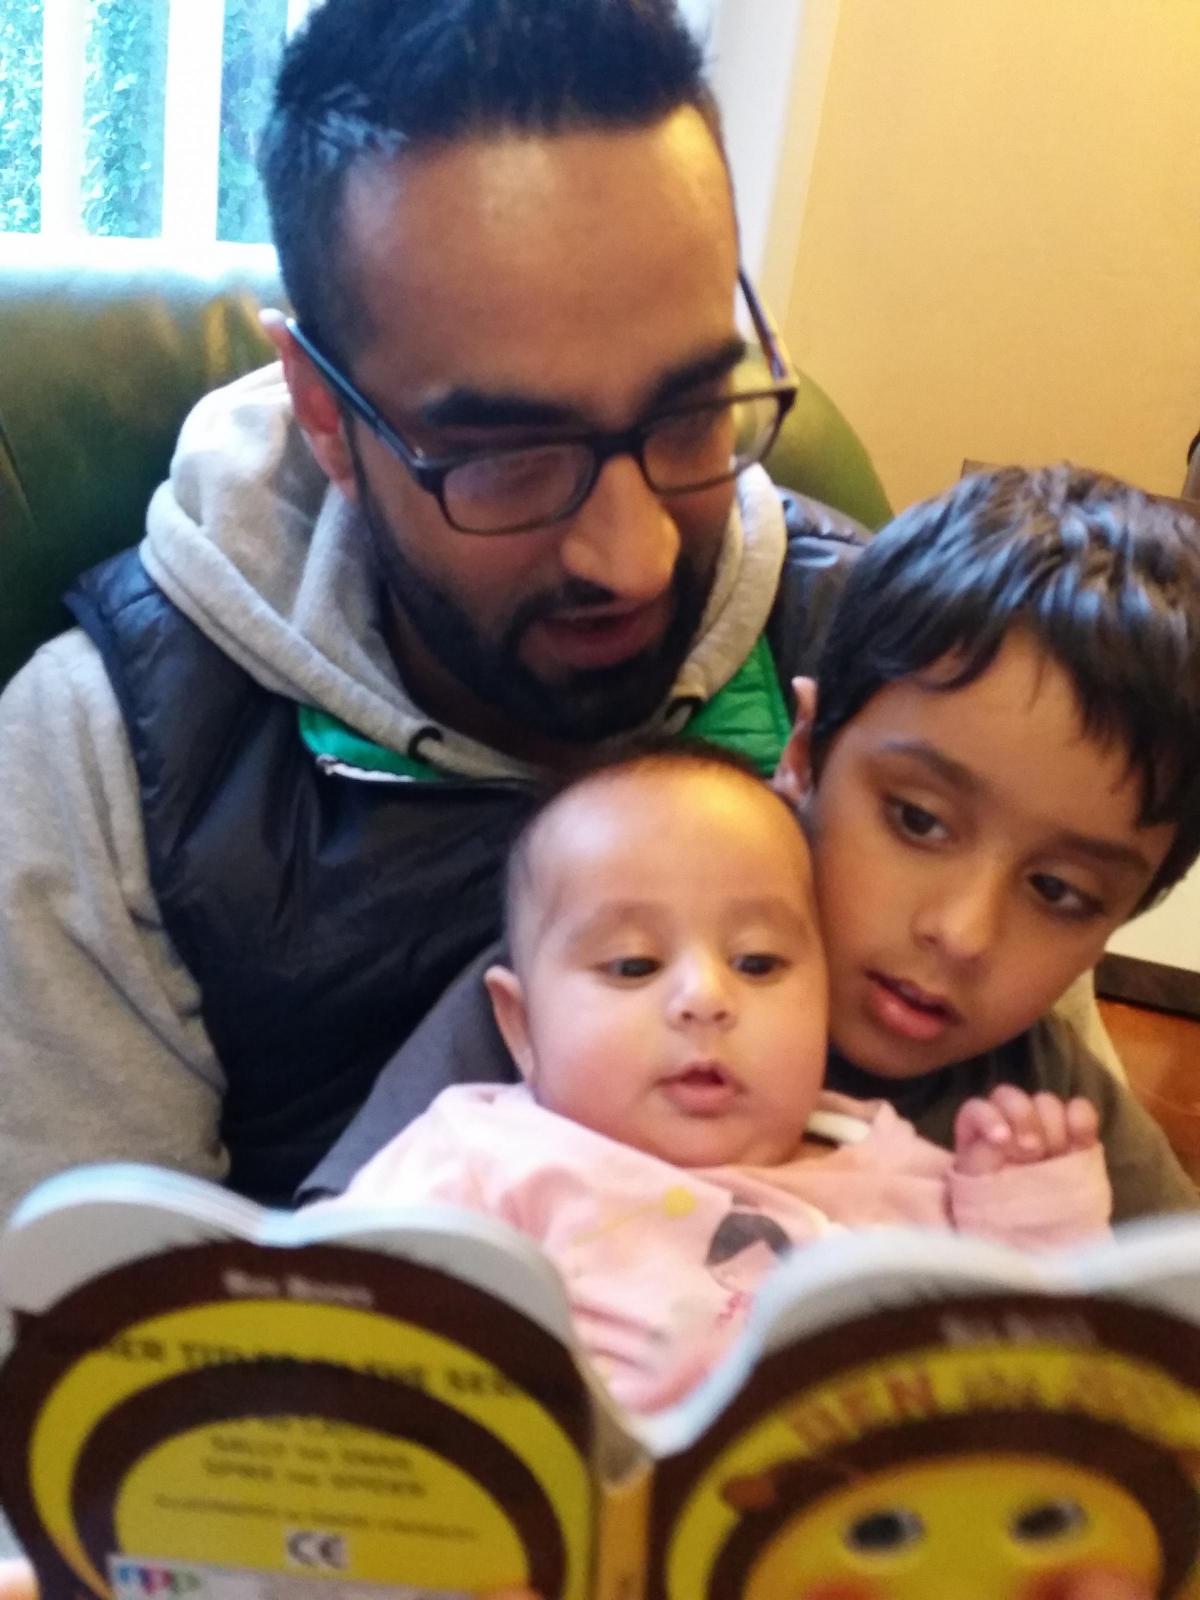 Imran Hafeez, Manager of the National Literacy Trust Hub in Bradford reading to his 3-month-old daughter, Kenzah and son Sudais, aged 5. Their favourite book is Dogger by Shirley Hughes.